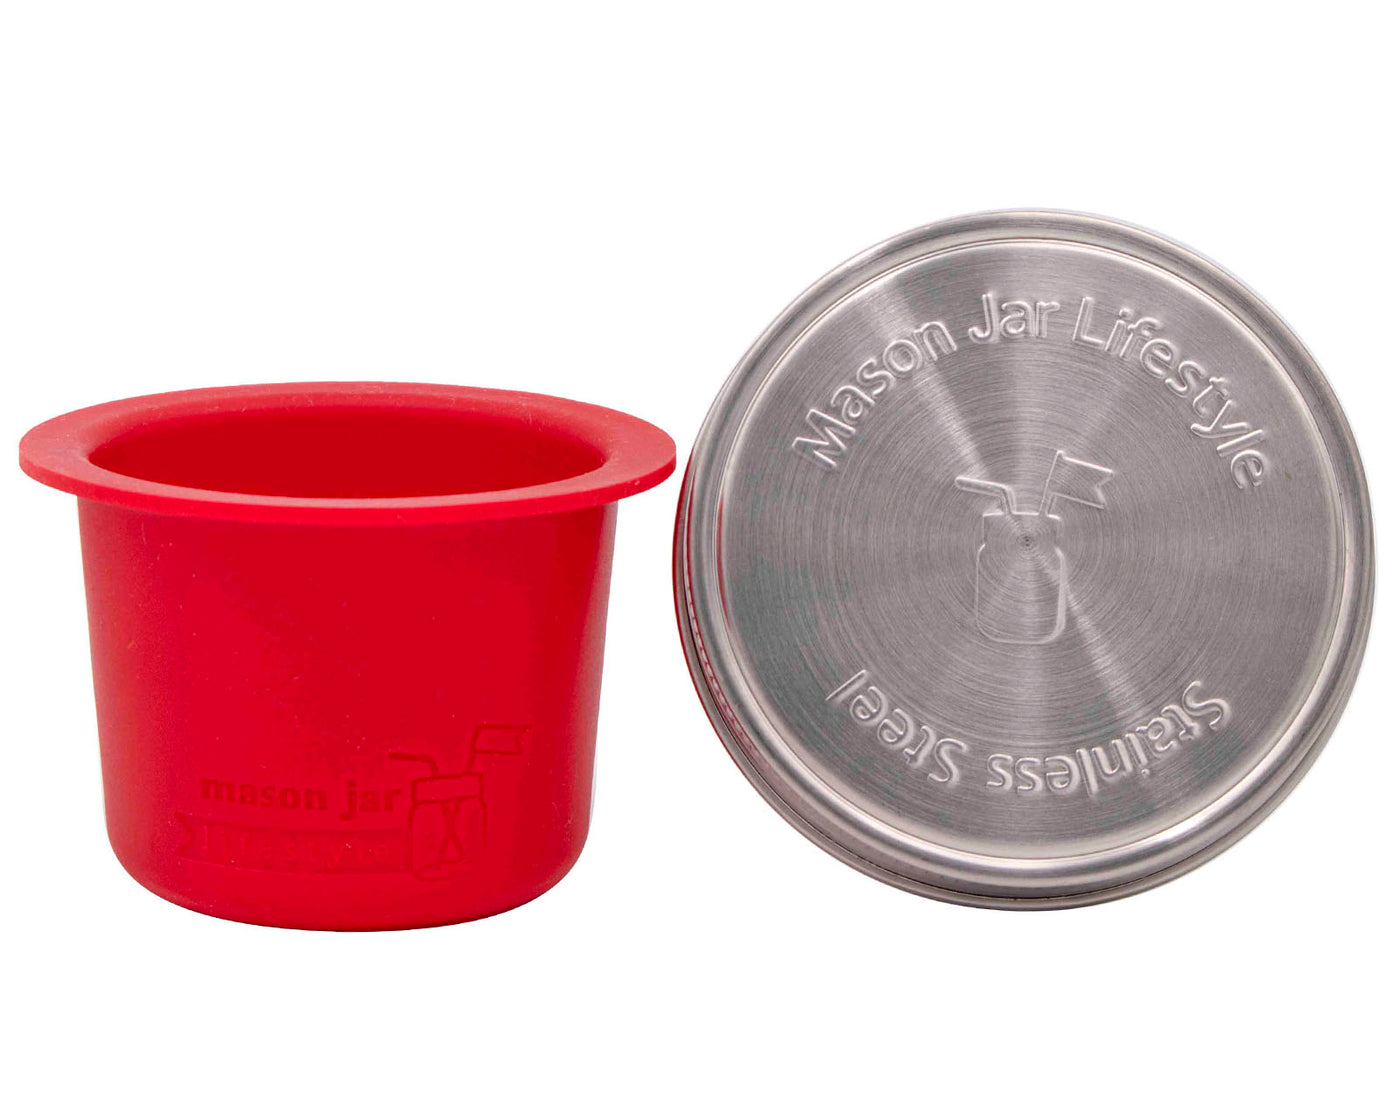 wide mouth cherry red silicone divider cup with stainless steel storage lid